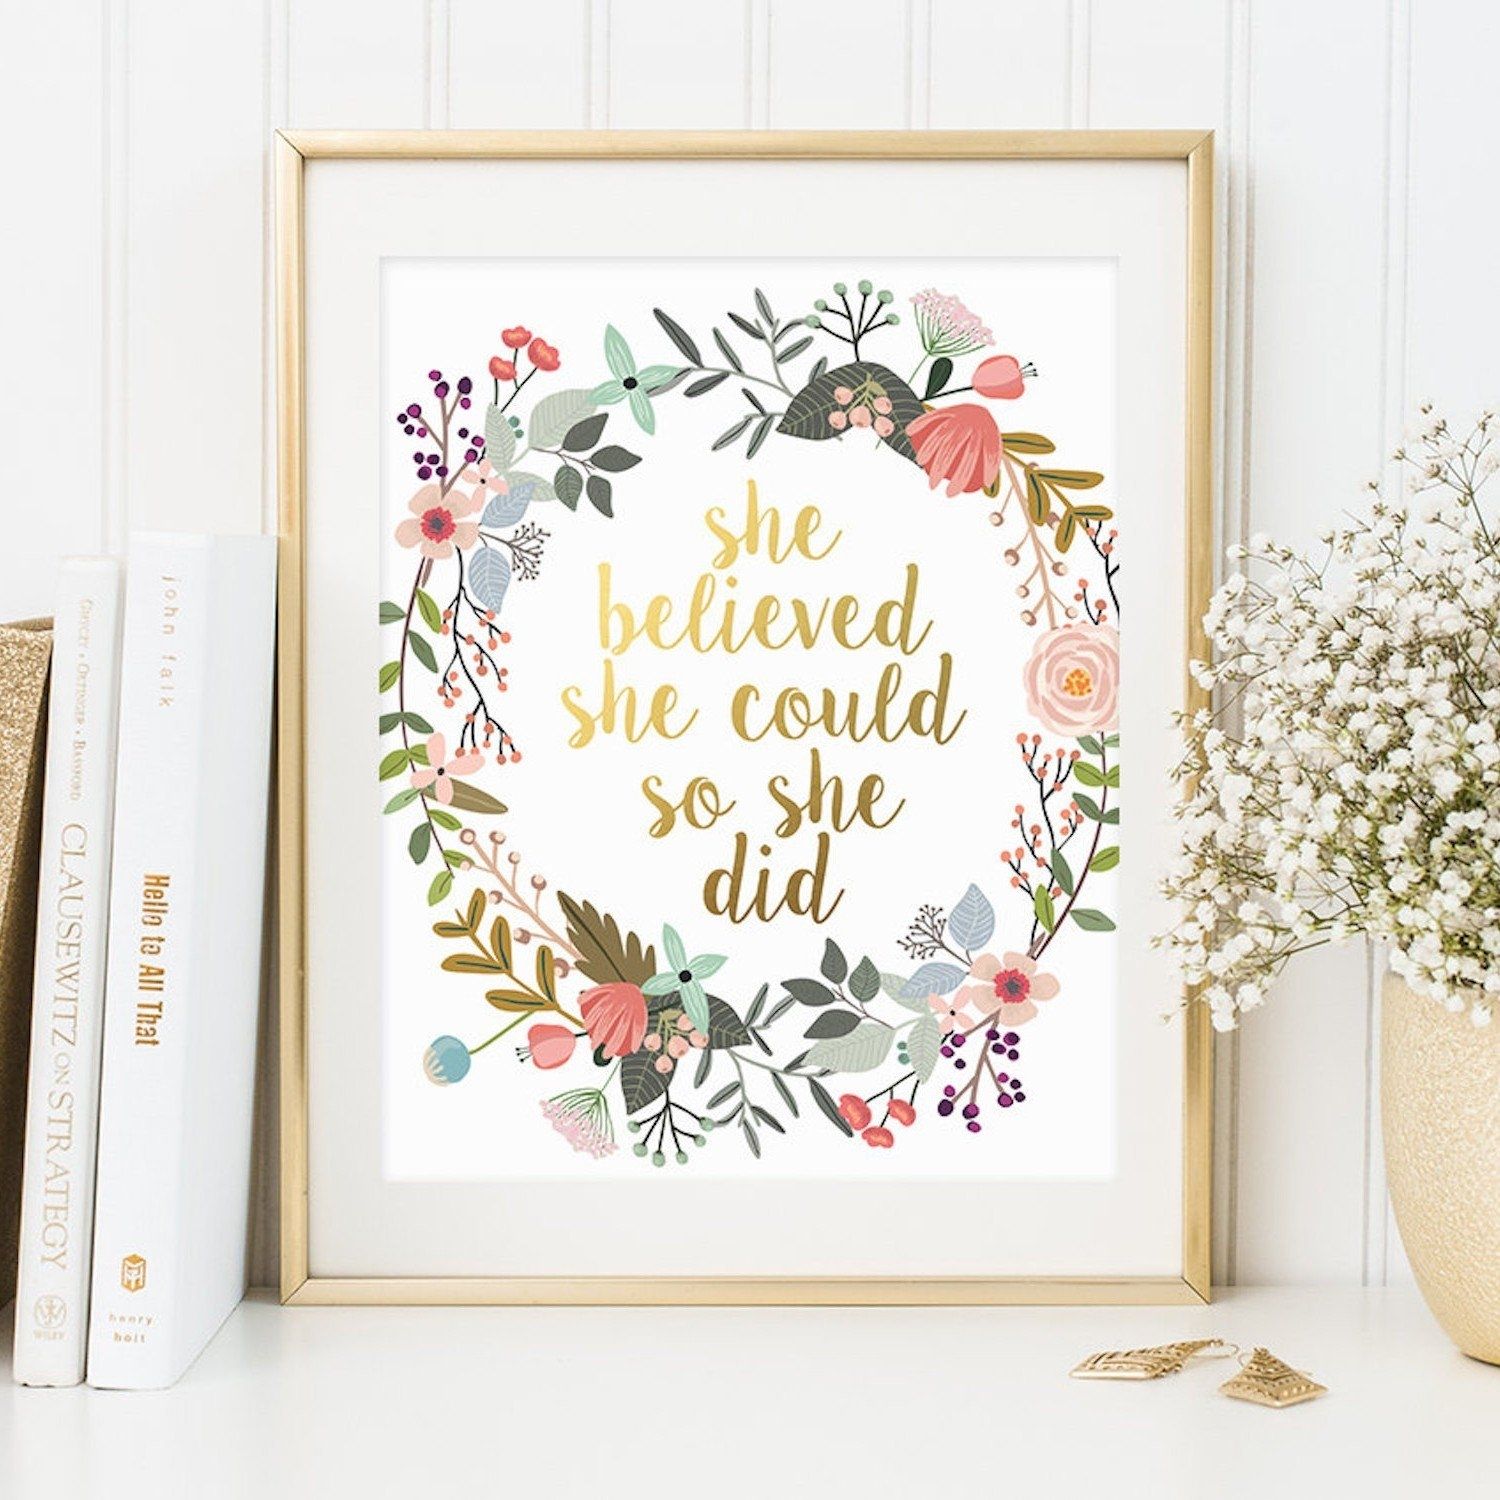 Inspirational Quote Wall Art | Popsugar Moms Within Quote Wall Art (View 9 of 20)